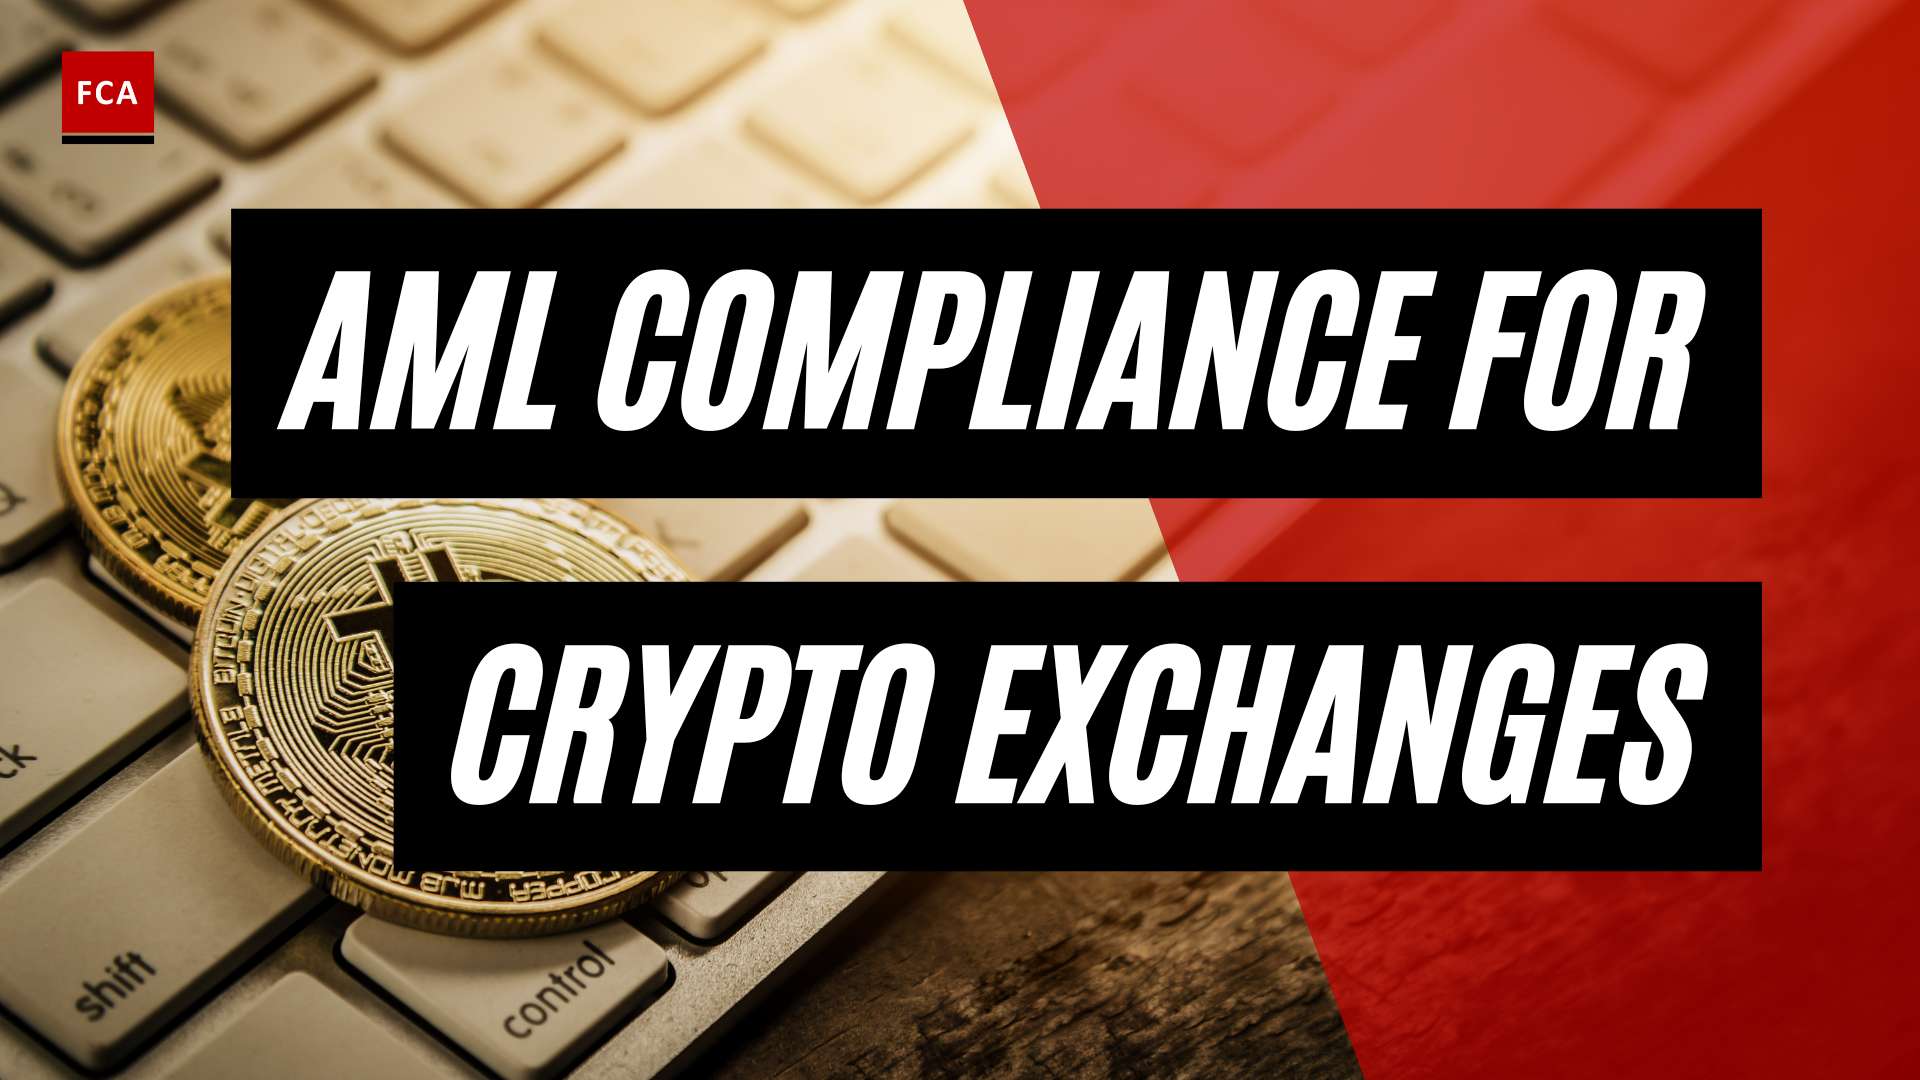 Cracking Down On Illicit Activities: Aml Compliance For Crypto Exchanges